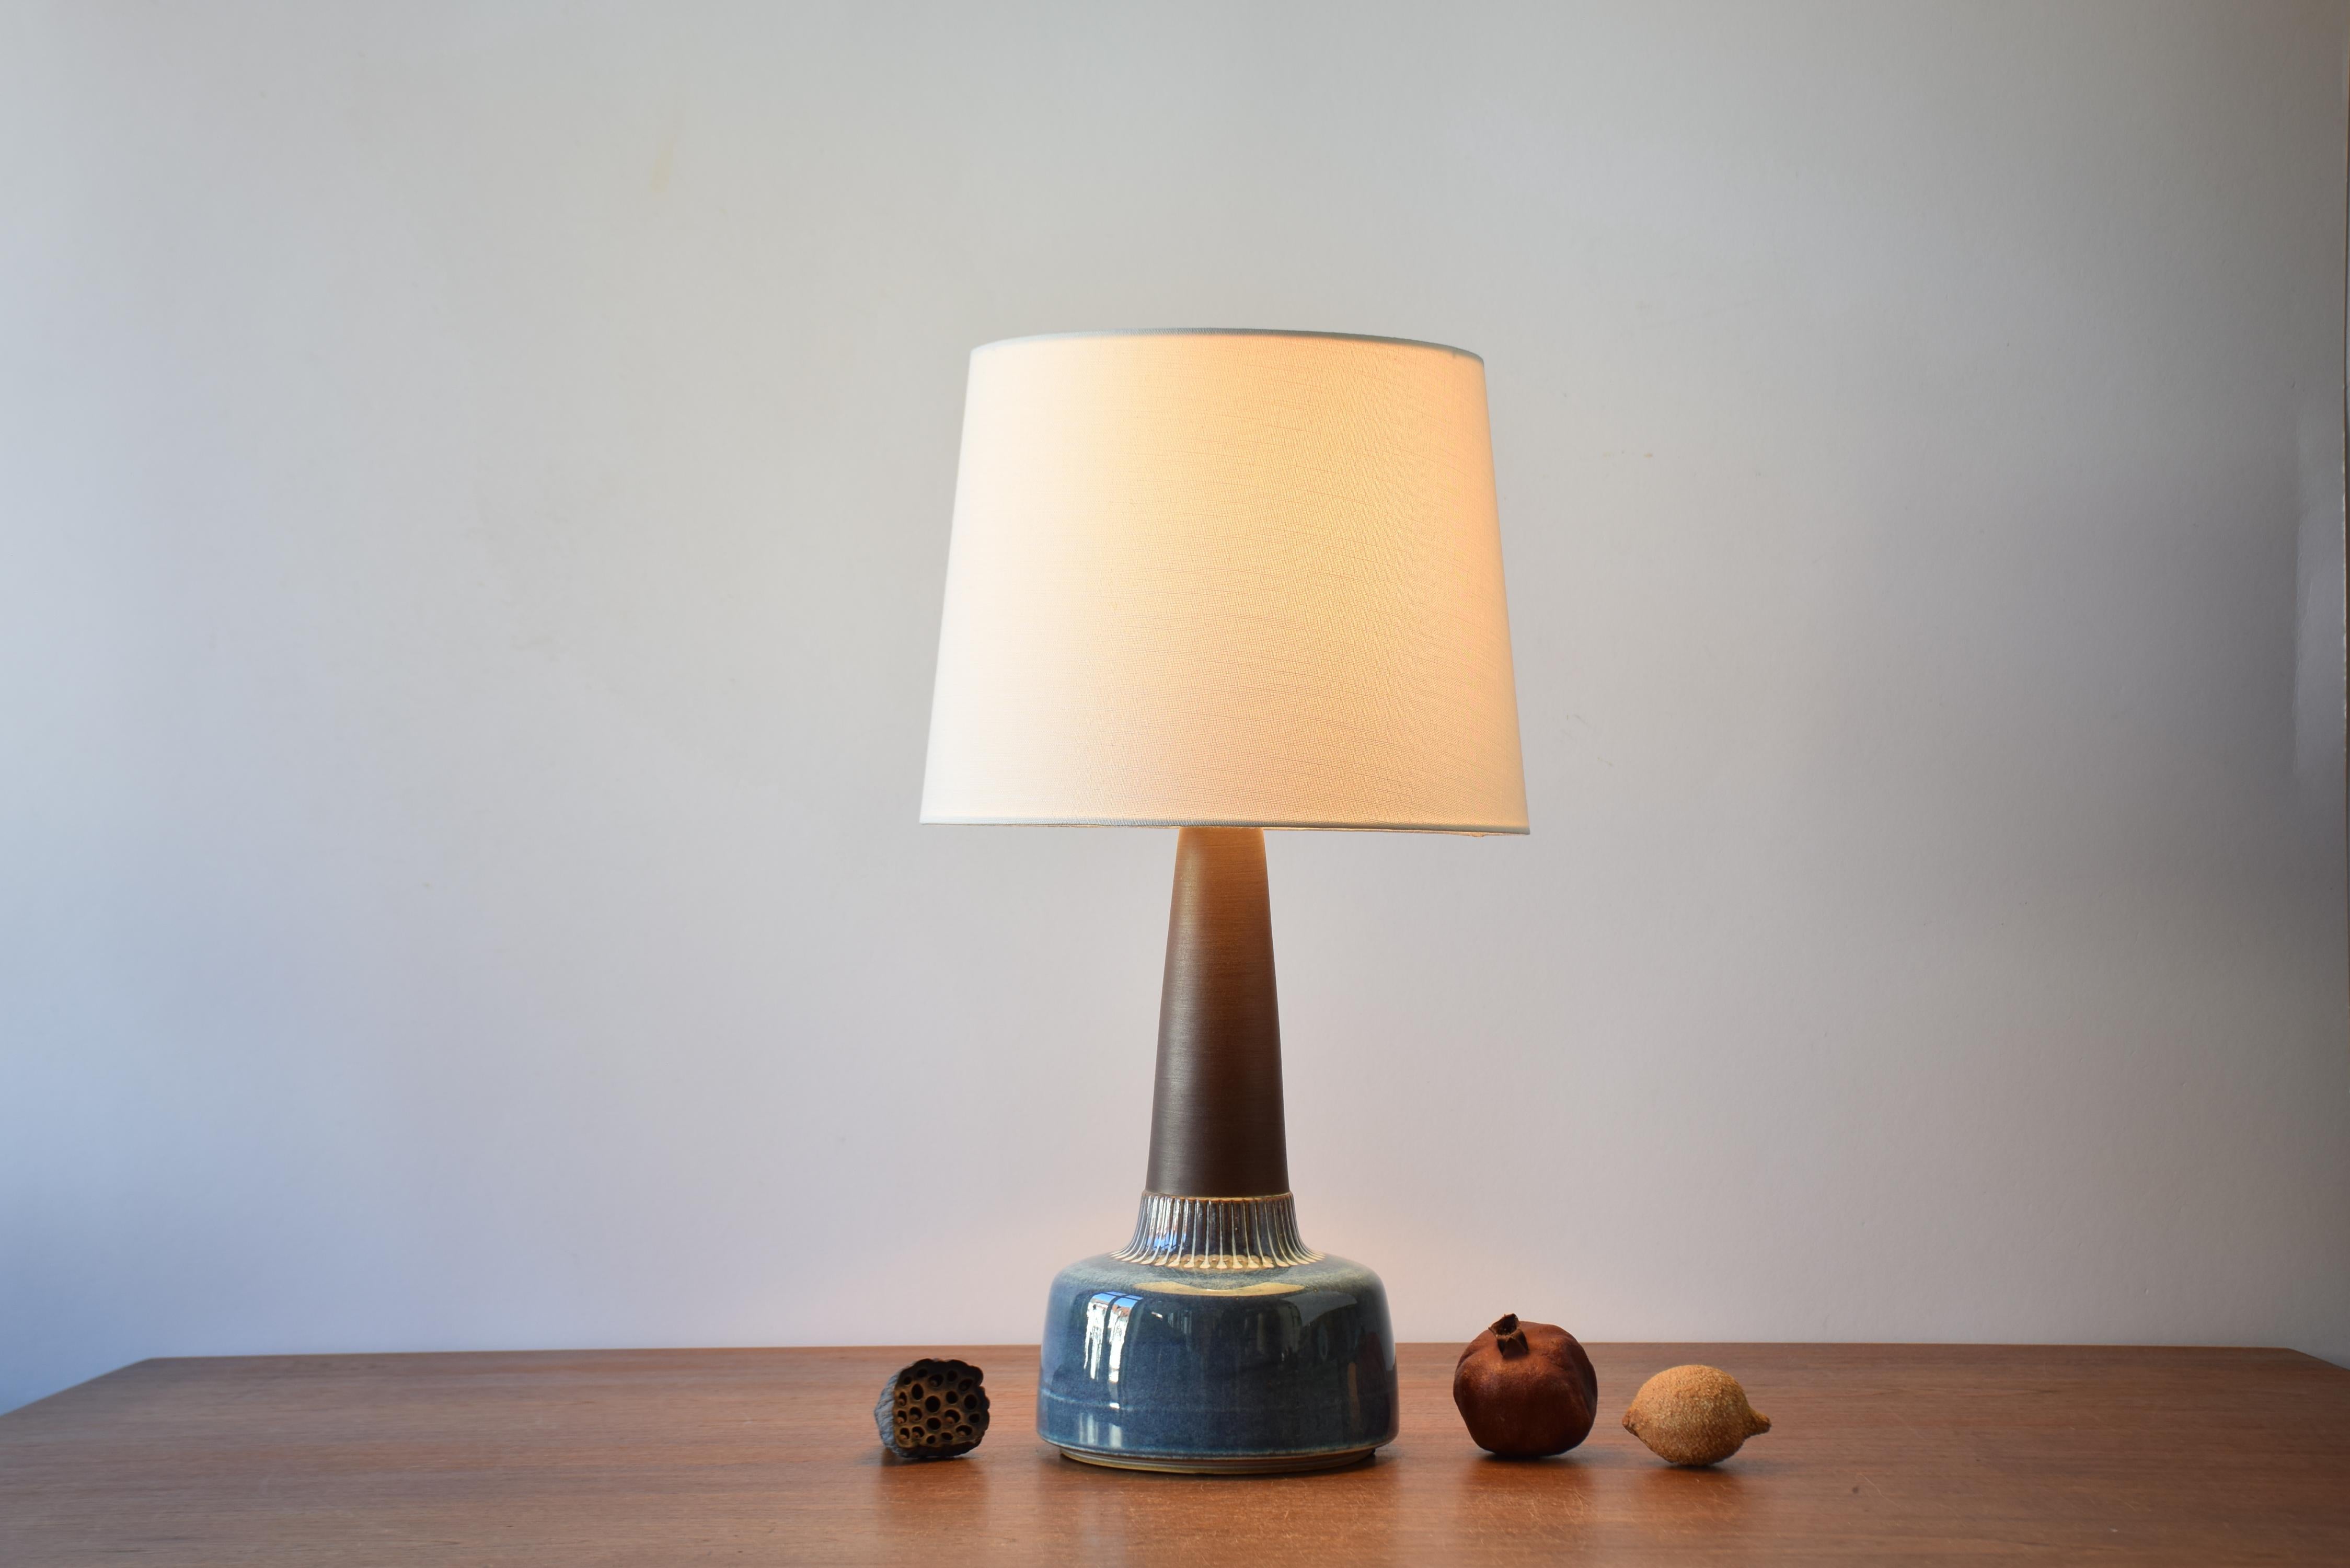 Tall Mid-century Danish table lamp by Danish ceramist Einar Johansen for Søholm. Made circa 1960s.

The lamp base has a matte brown neck contrasted by a shiny glaze in mother-of-pearl colors and circular dots around the lower part.

The lamp has an